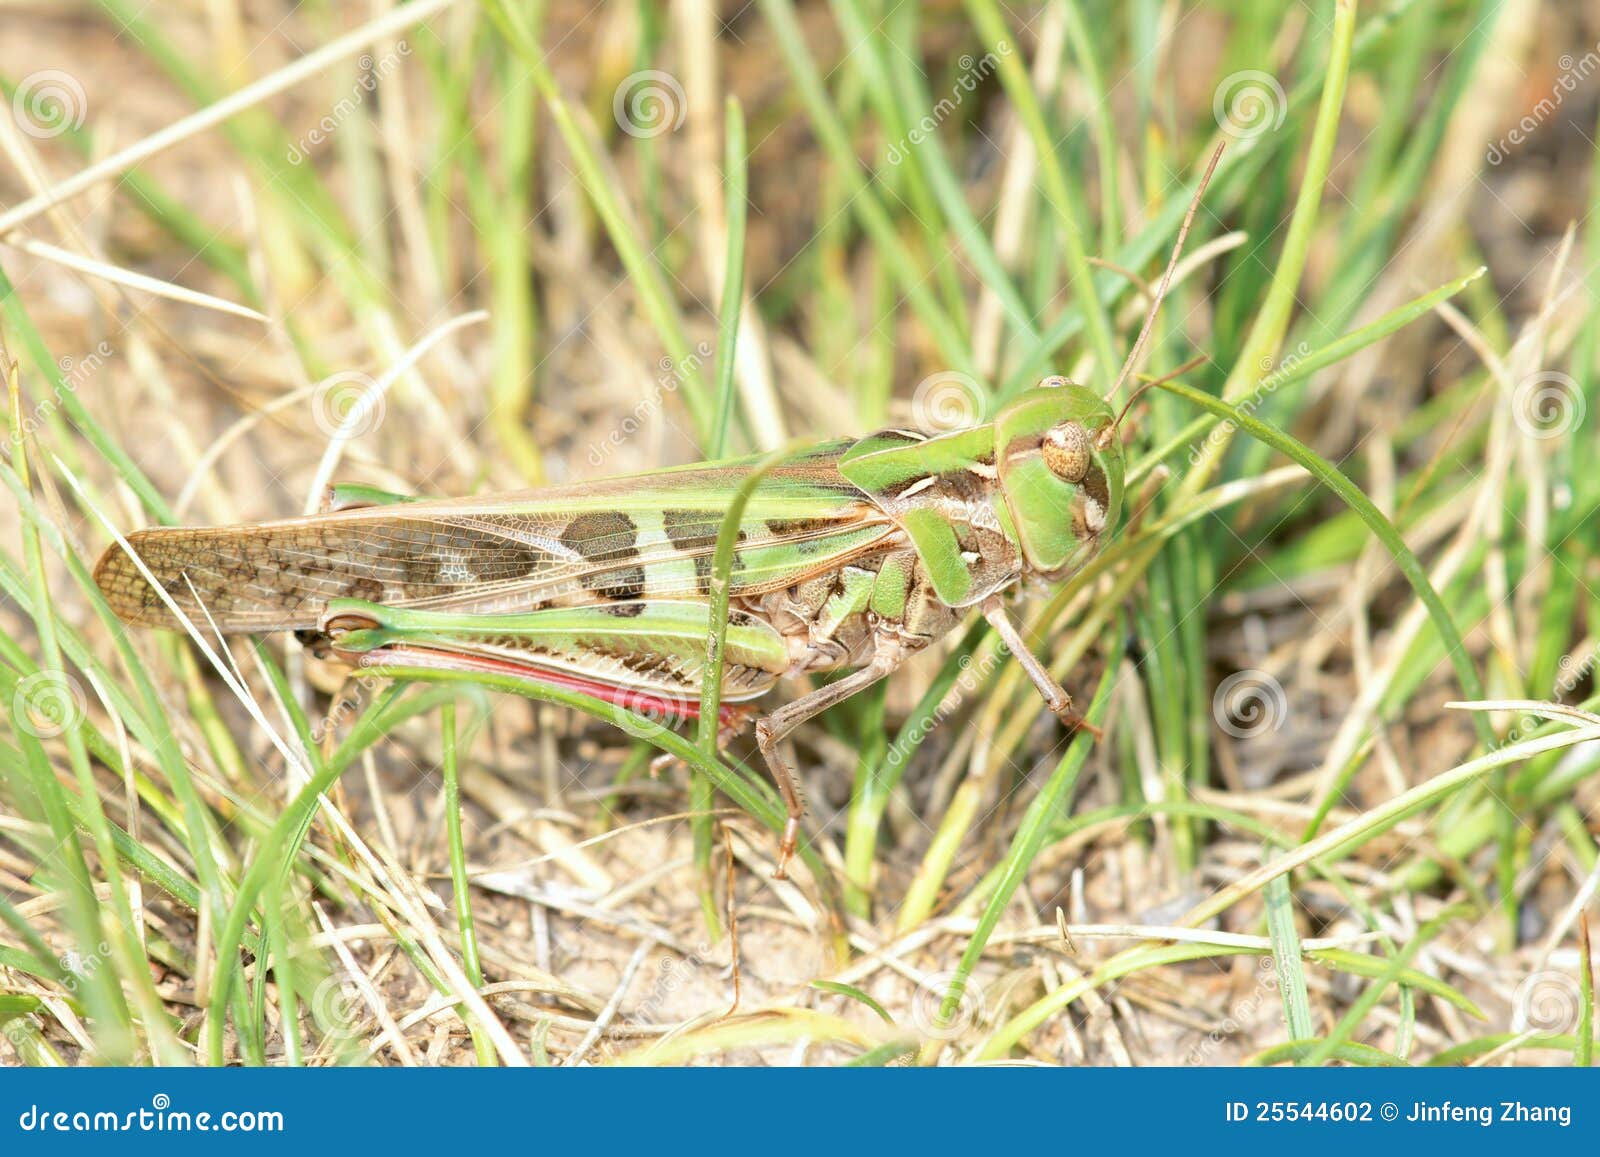 Protective coloration stock photo. Image of camouflage - 25544602